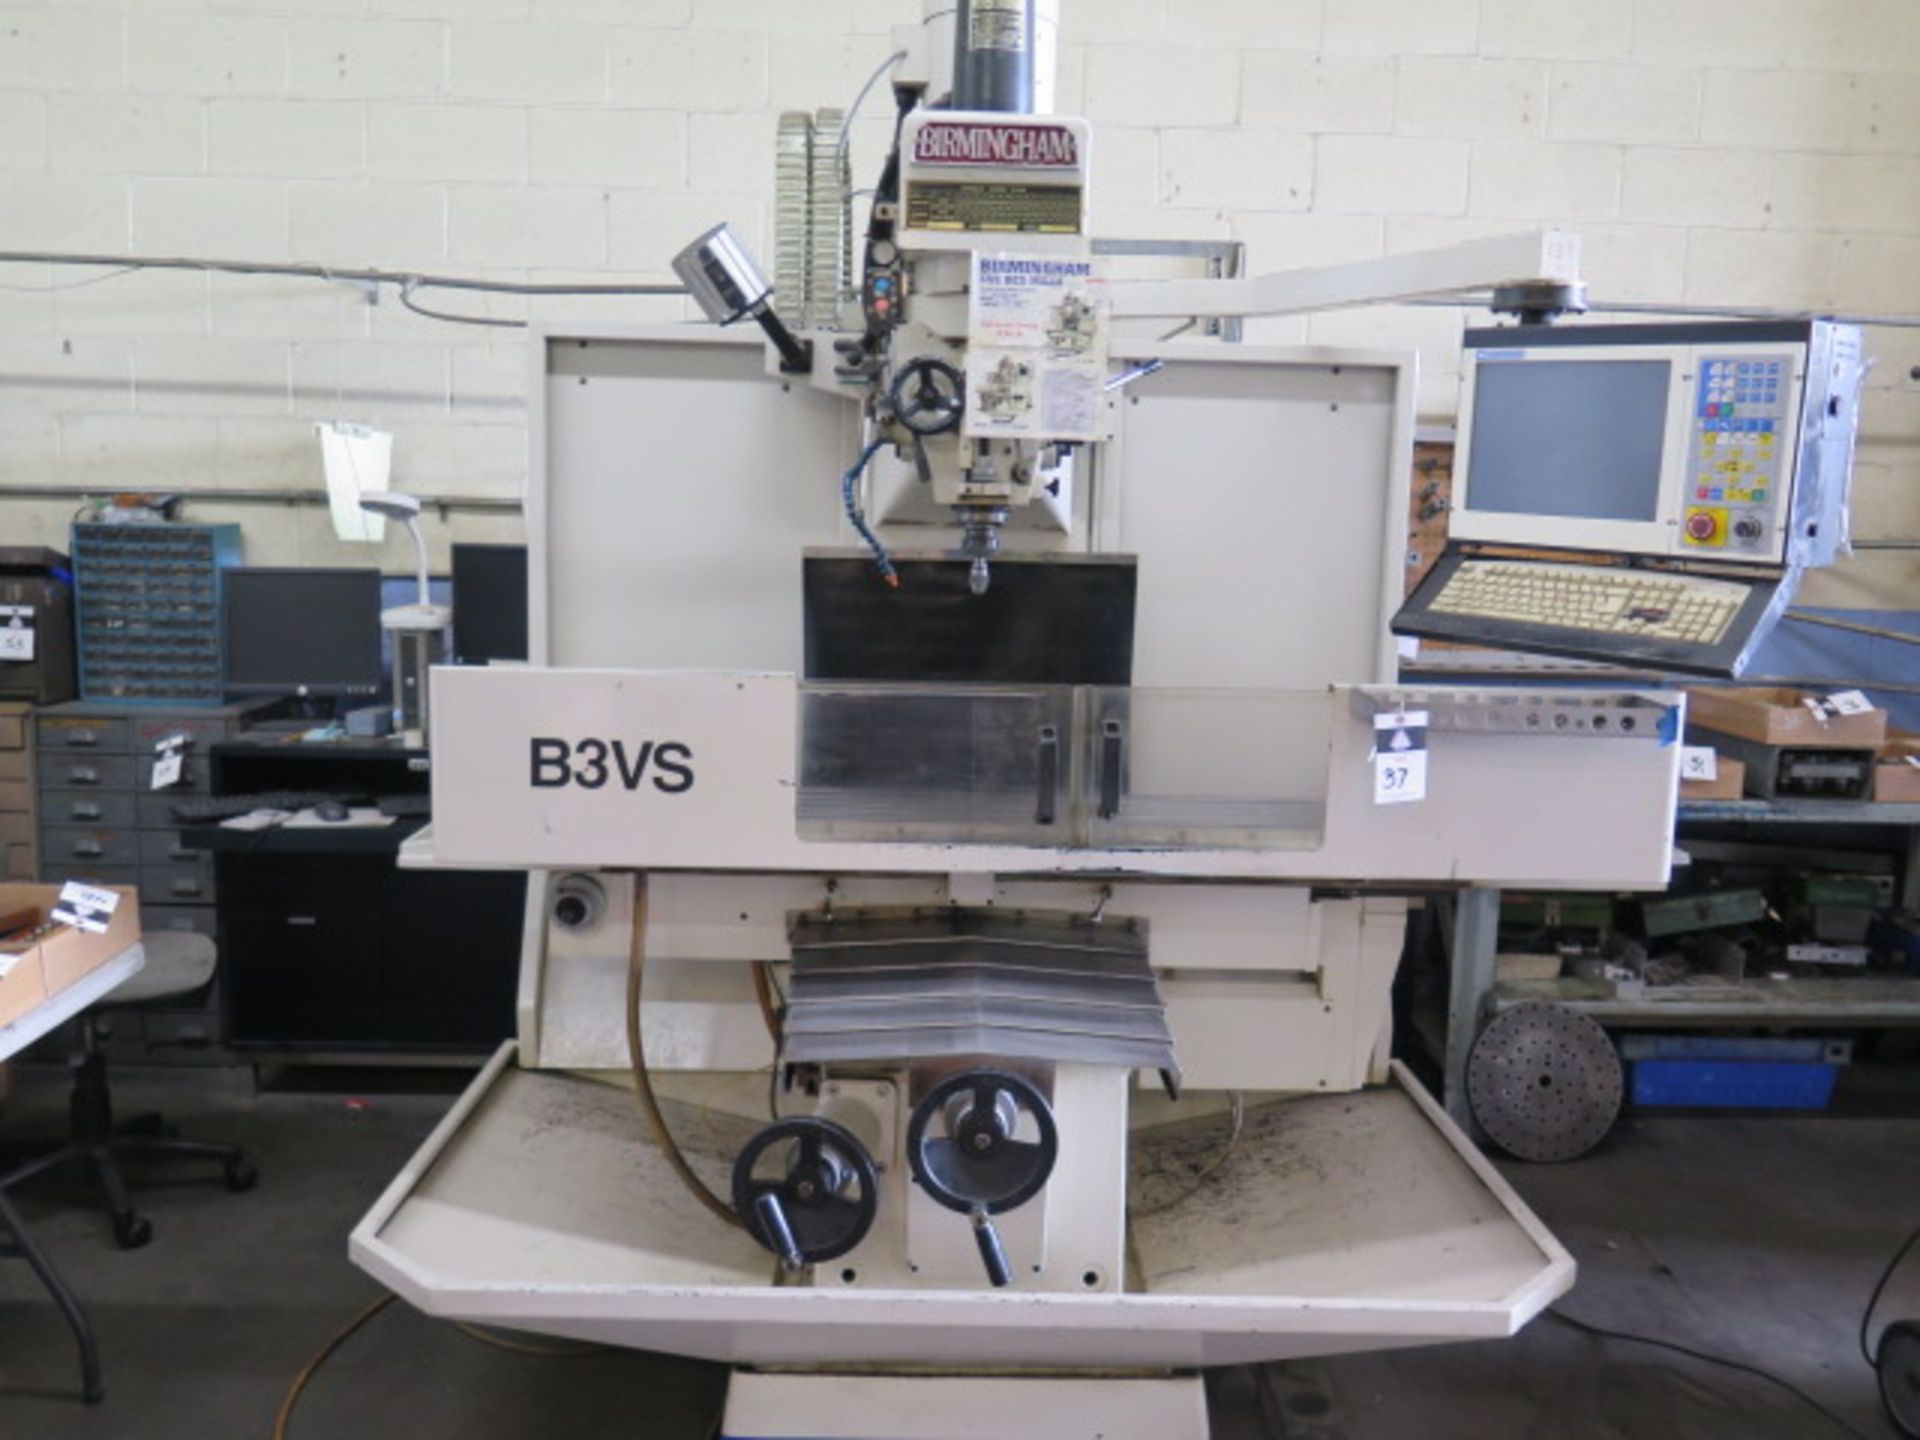 Birmingham BRV-B3VS 2-Axis CNC Mill s/n 011454 w/ Centroid Controls, 40-Taper Spindle, SOLD AS IS